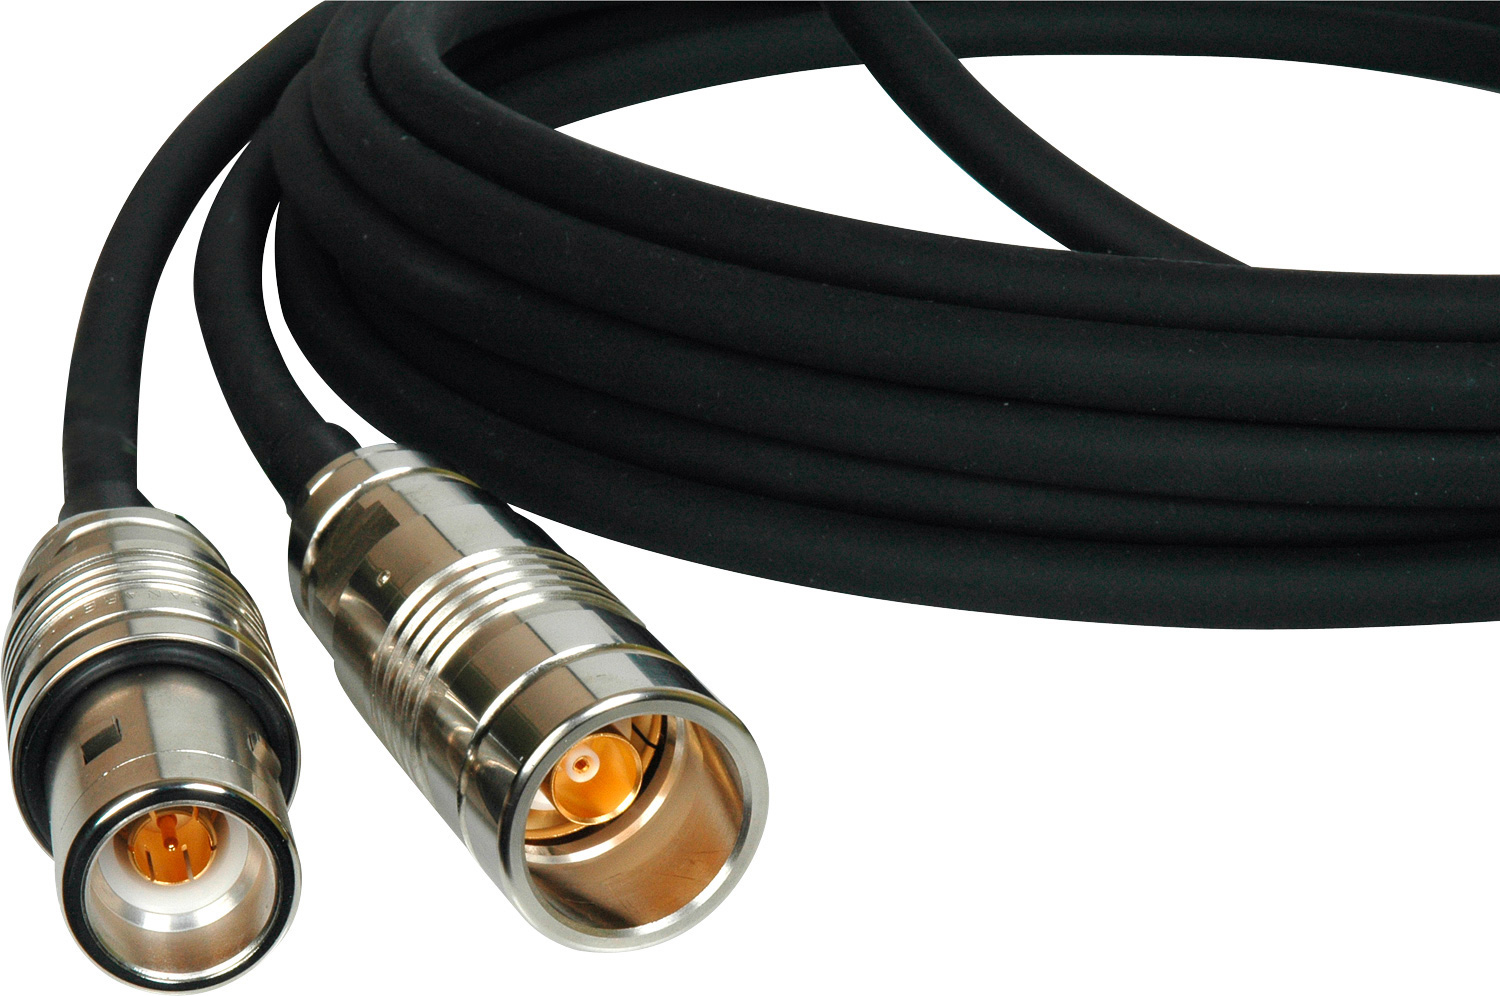 Laird TRI-1857A-250 Belden 1857A RG59/U Stranded Triax Male to Female Cable - 250 Foot